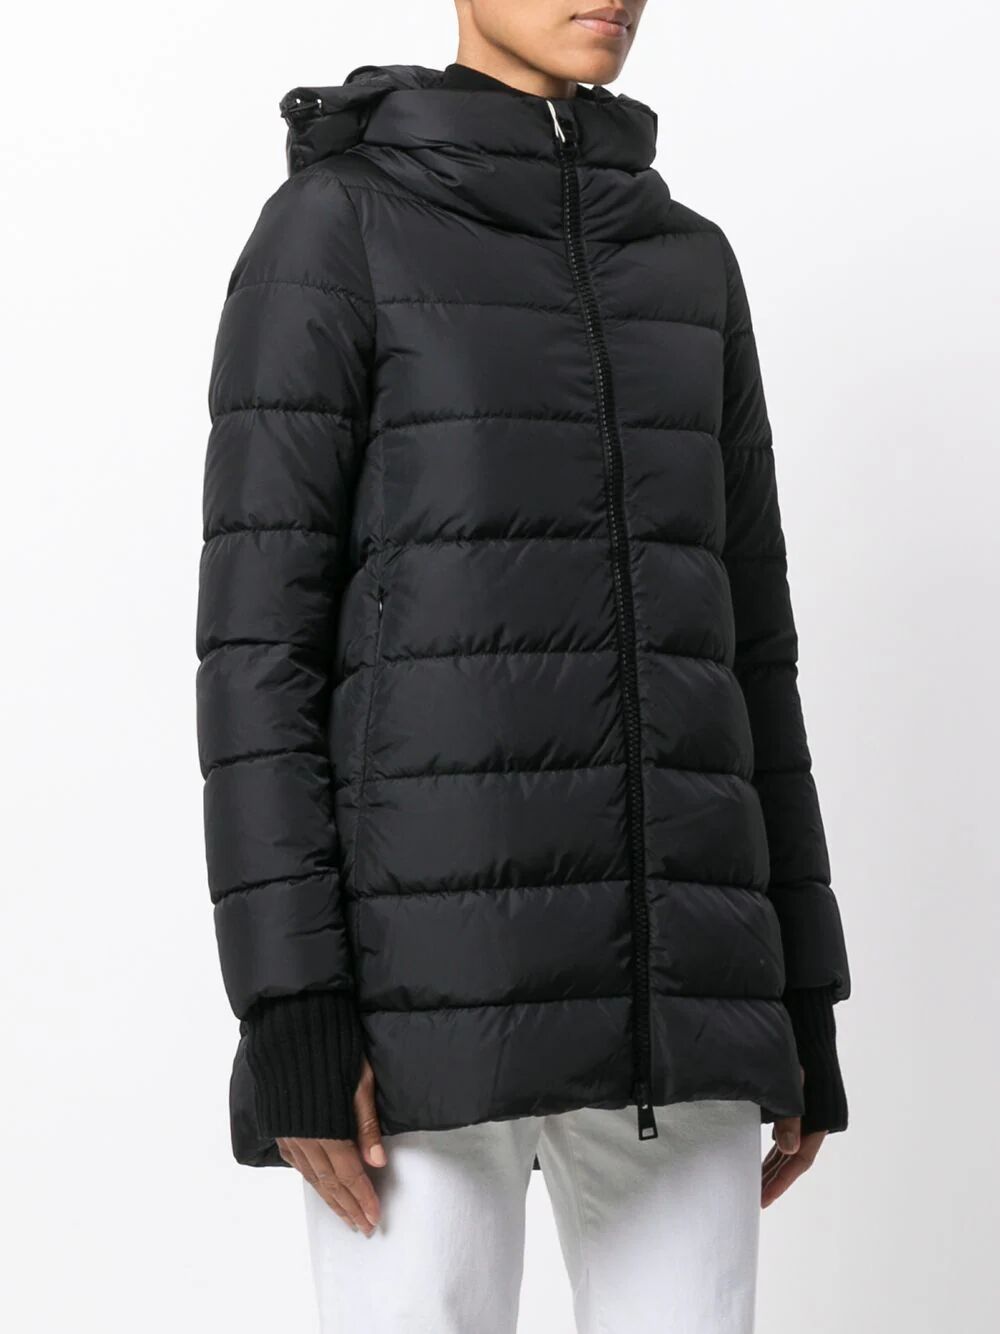 HERNO Medium Down Jacket for Women in Black - FW24 Collection